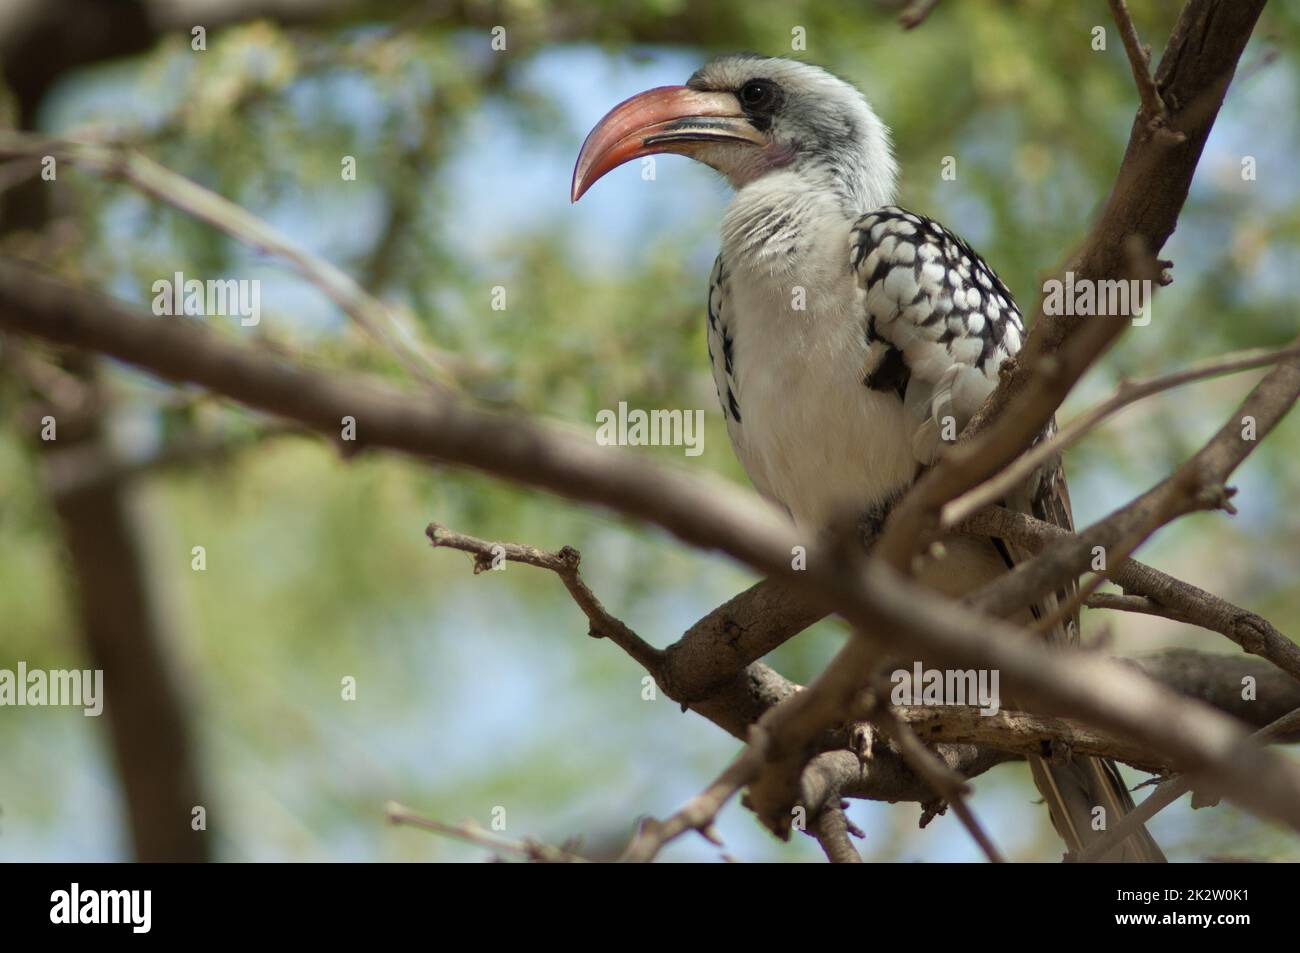 Northern red-billed hornbill Tockus erythrorhynchus kempi on a tree. Stock Photo